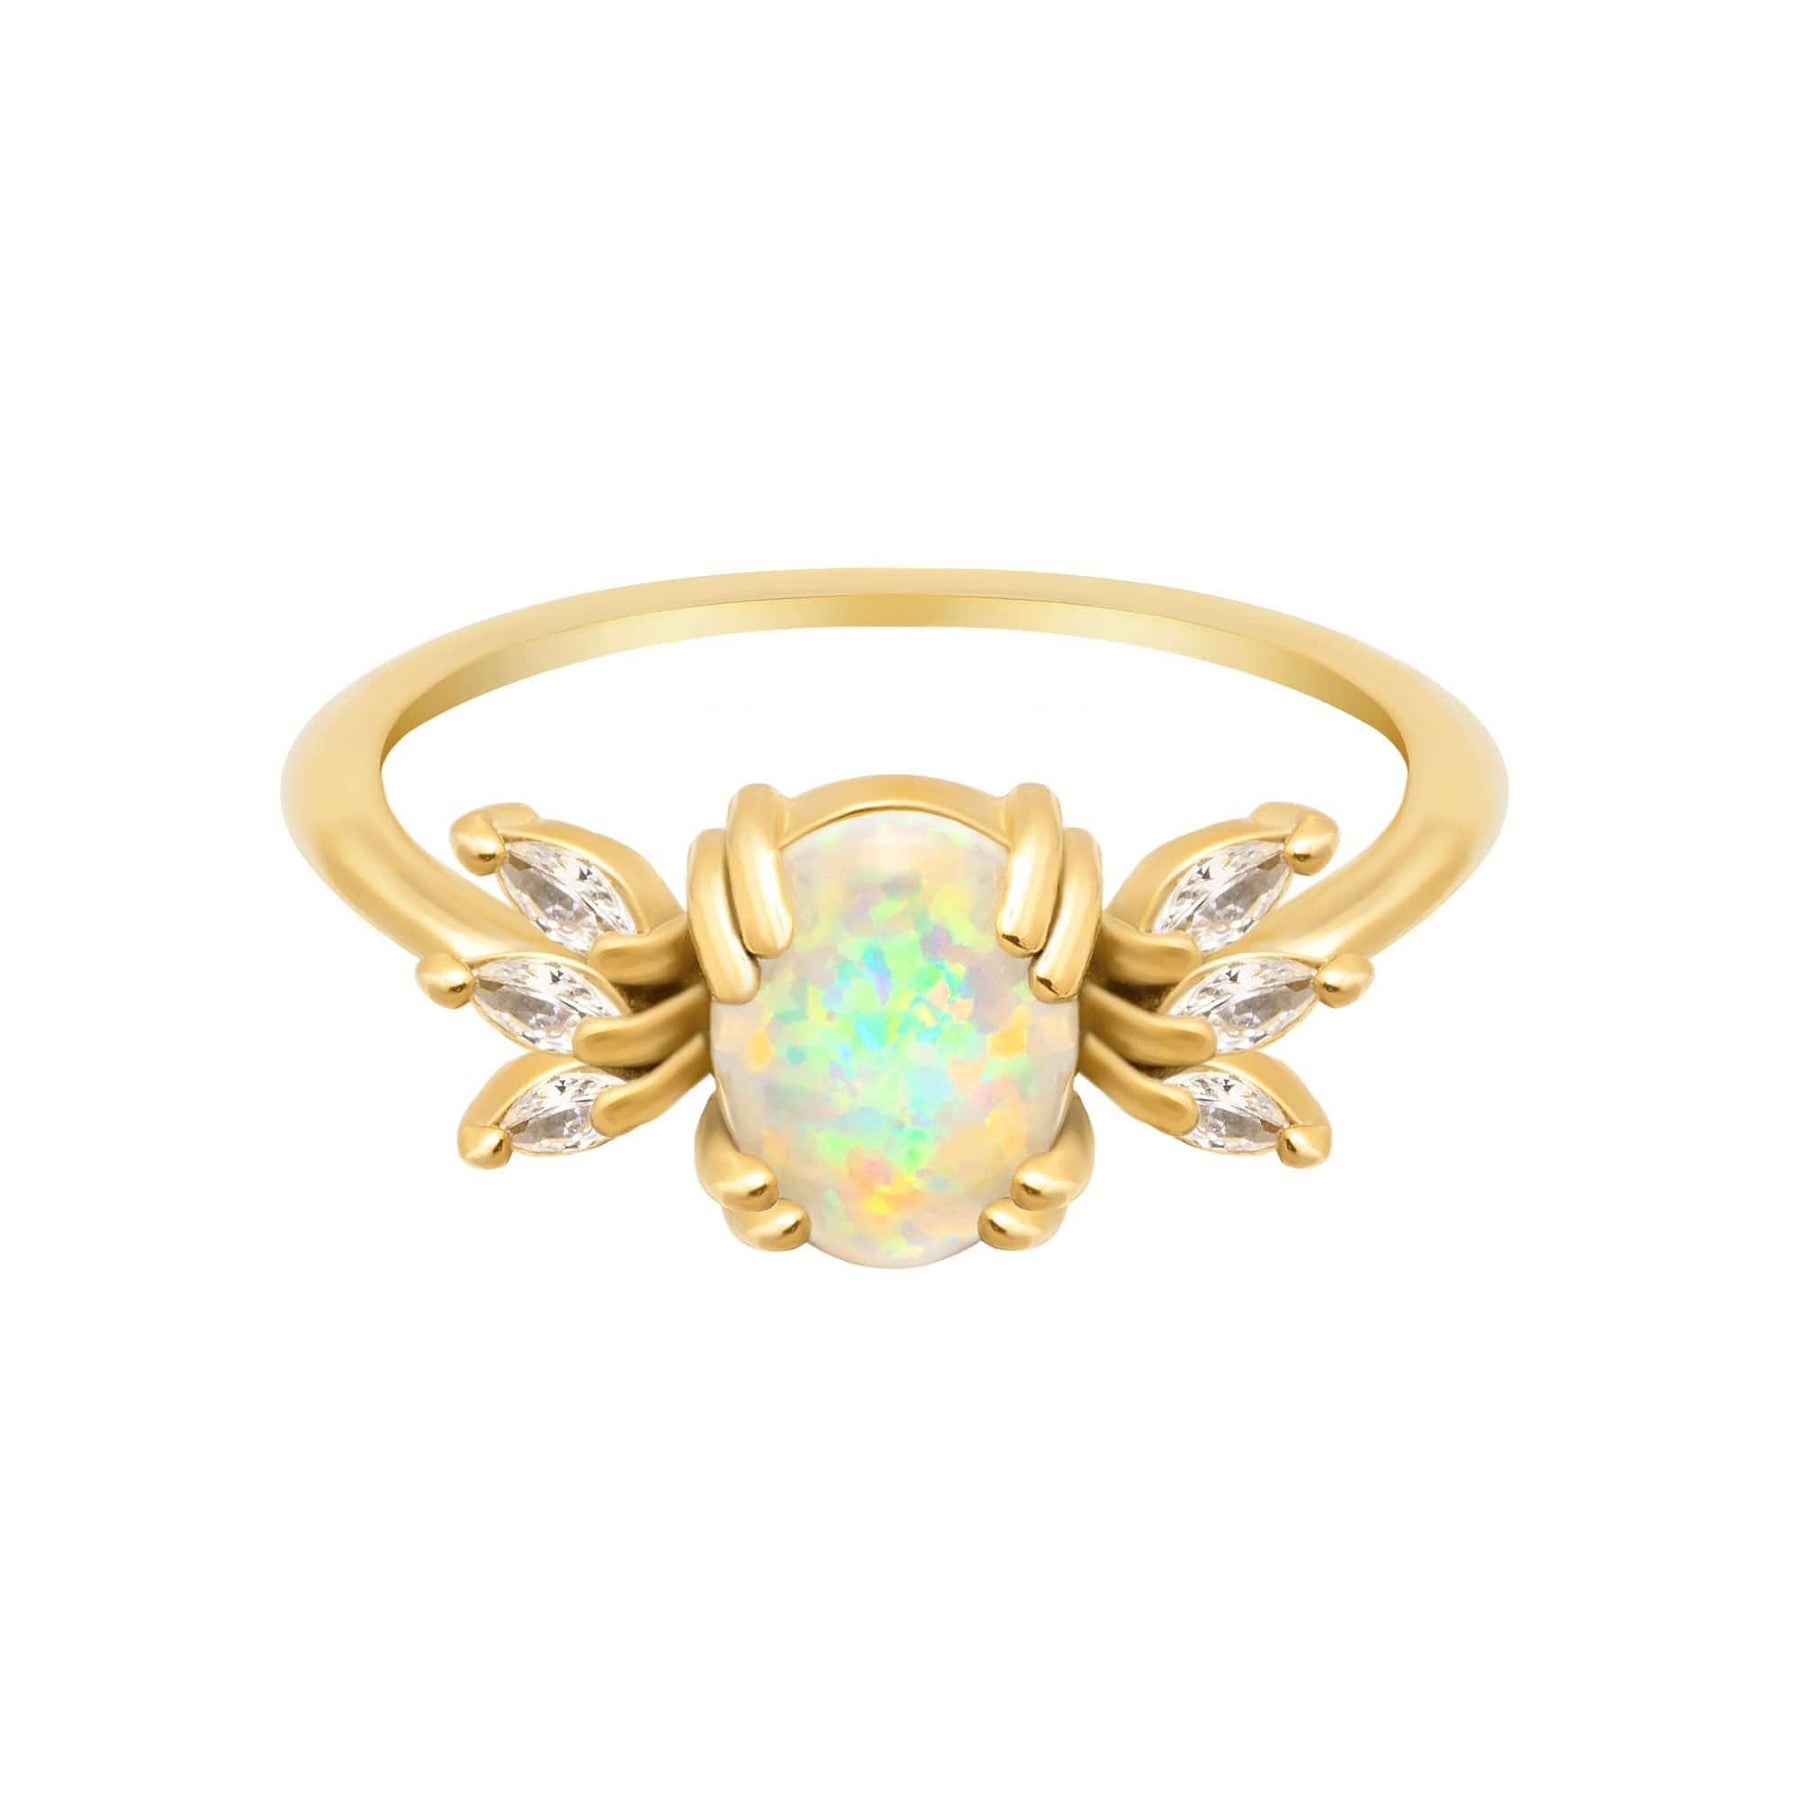 BohoMoon Stainless Steel Suzie Opal Ring Gold / US 6 / UK L / EUR 51 (small)